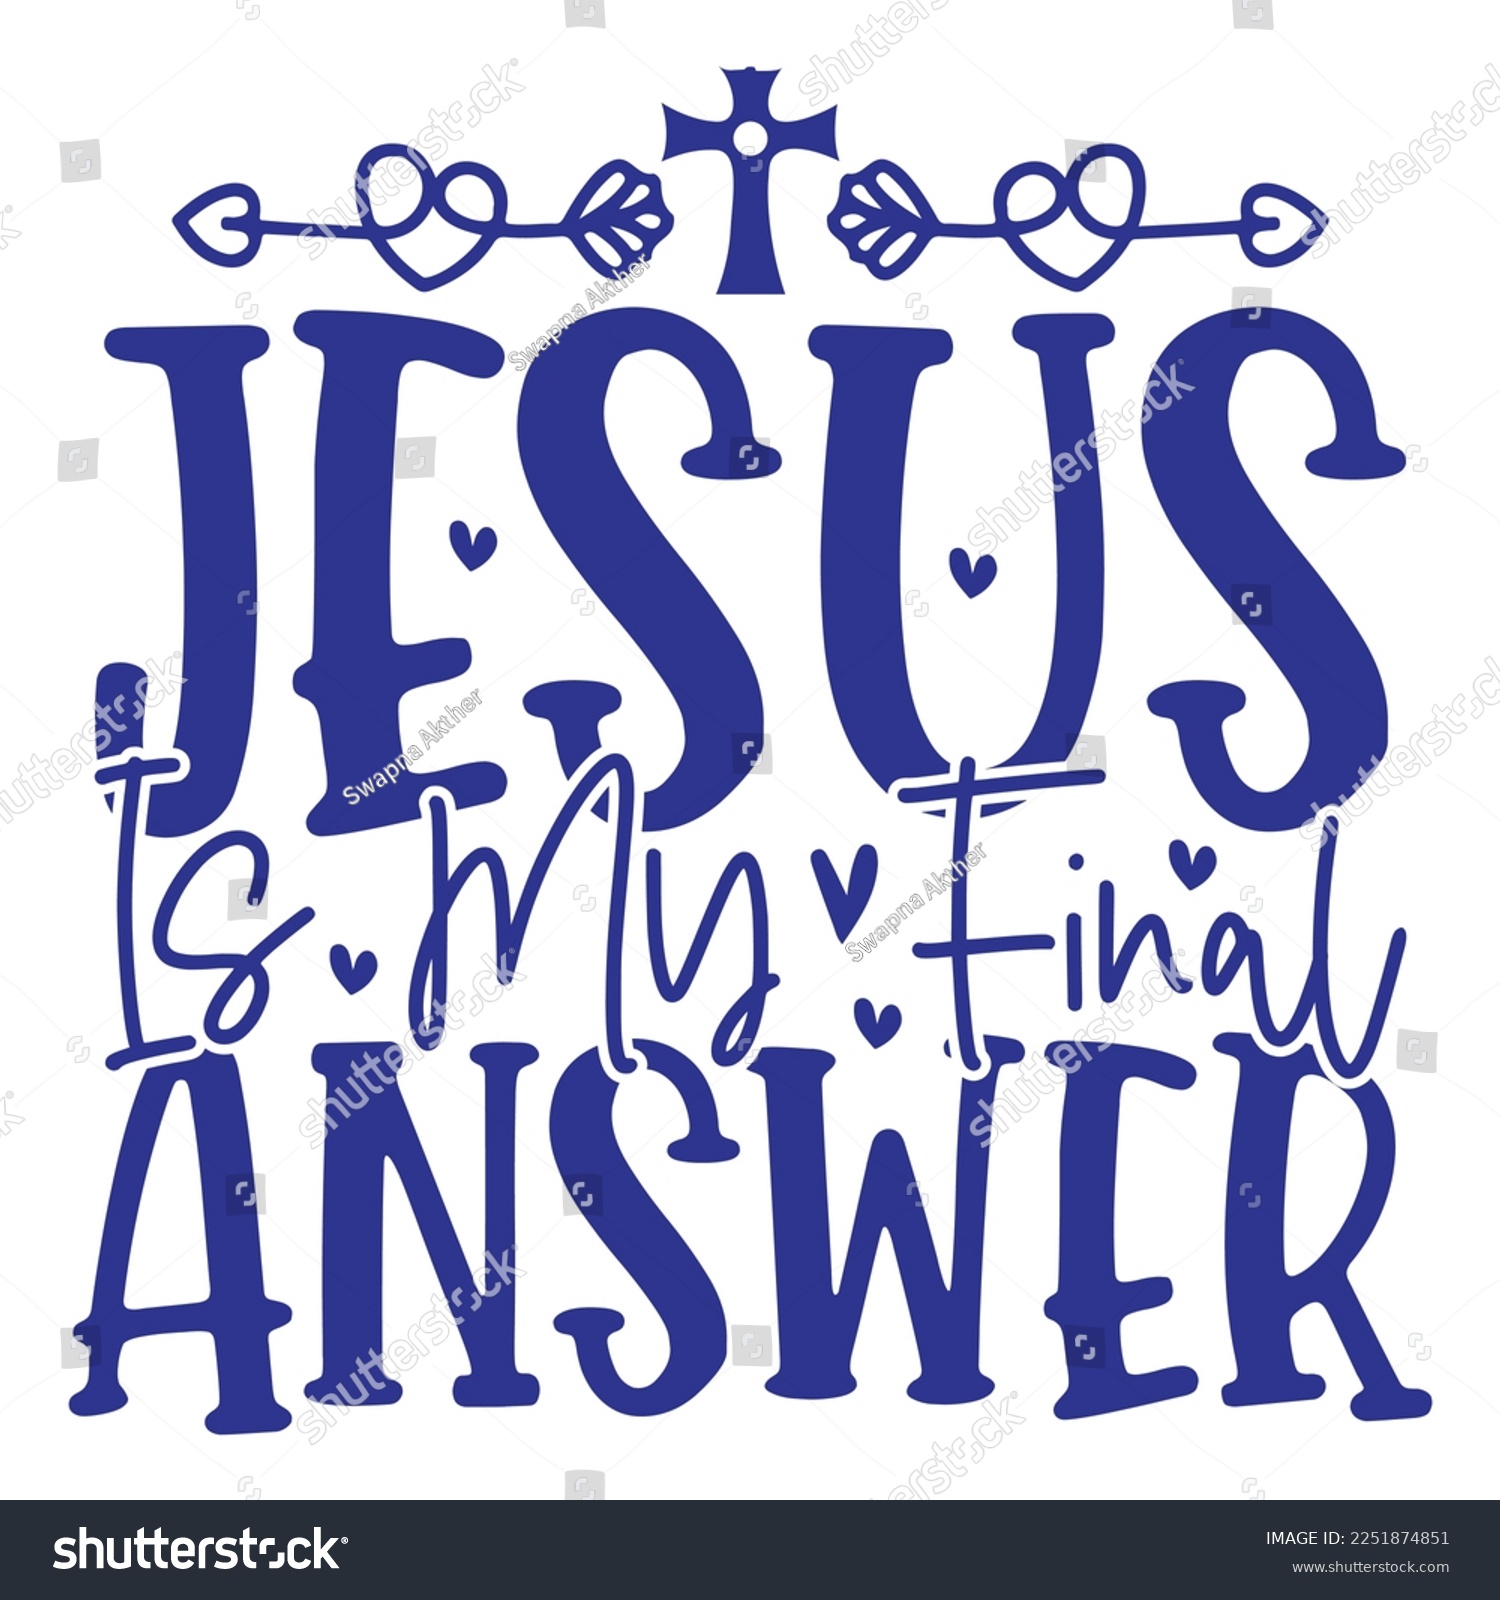 SVG of Jesus Is My Final Answer - Boho Style Religious Biblical Christian Jesus Quotes T-shirt And SVG Design. Motivational Inspirational SVG Quotes T shirt Design, Vector EPS Editable Files. svg